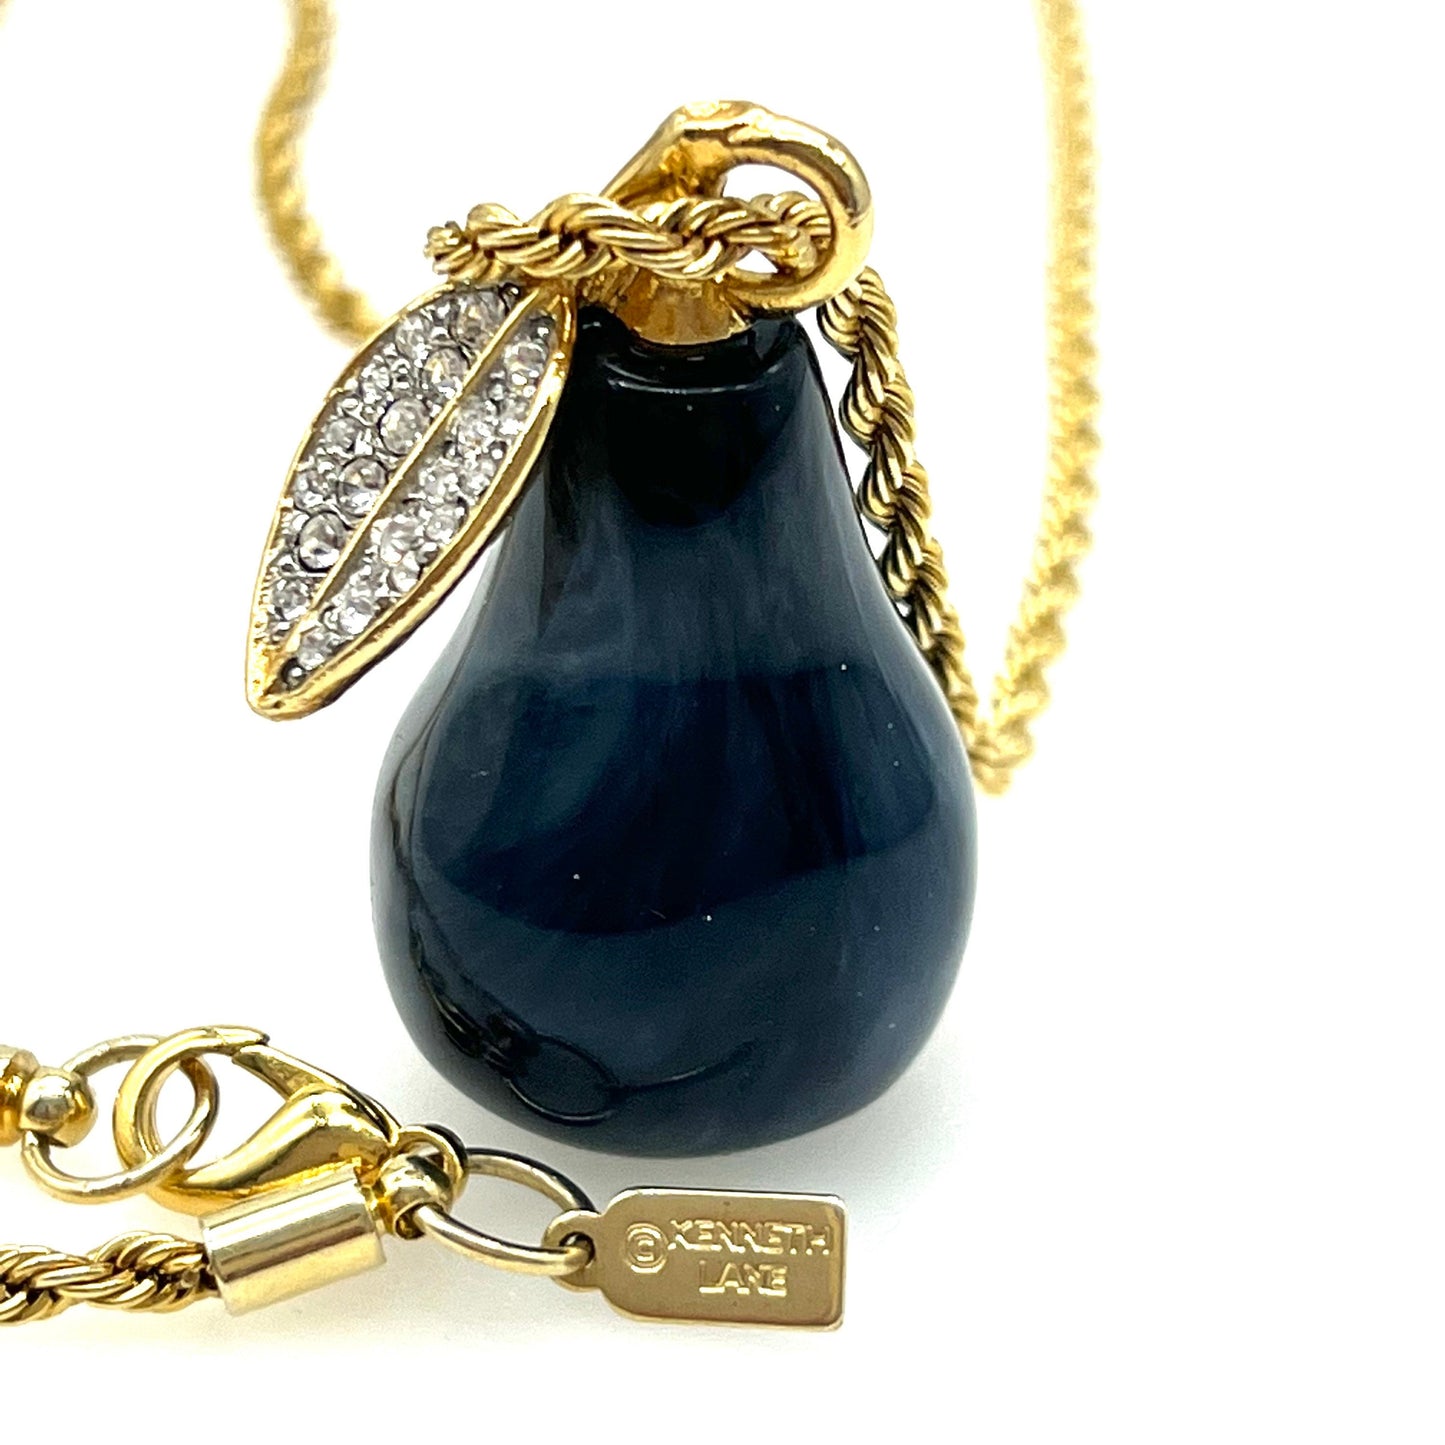 Kenneth Lane Petrol Blue Pear Pendant On Rope Necklace